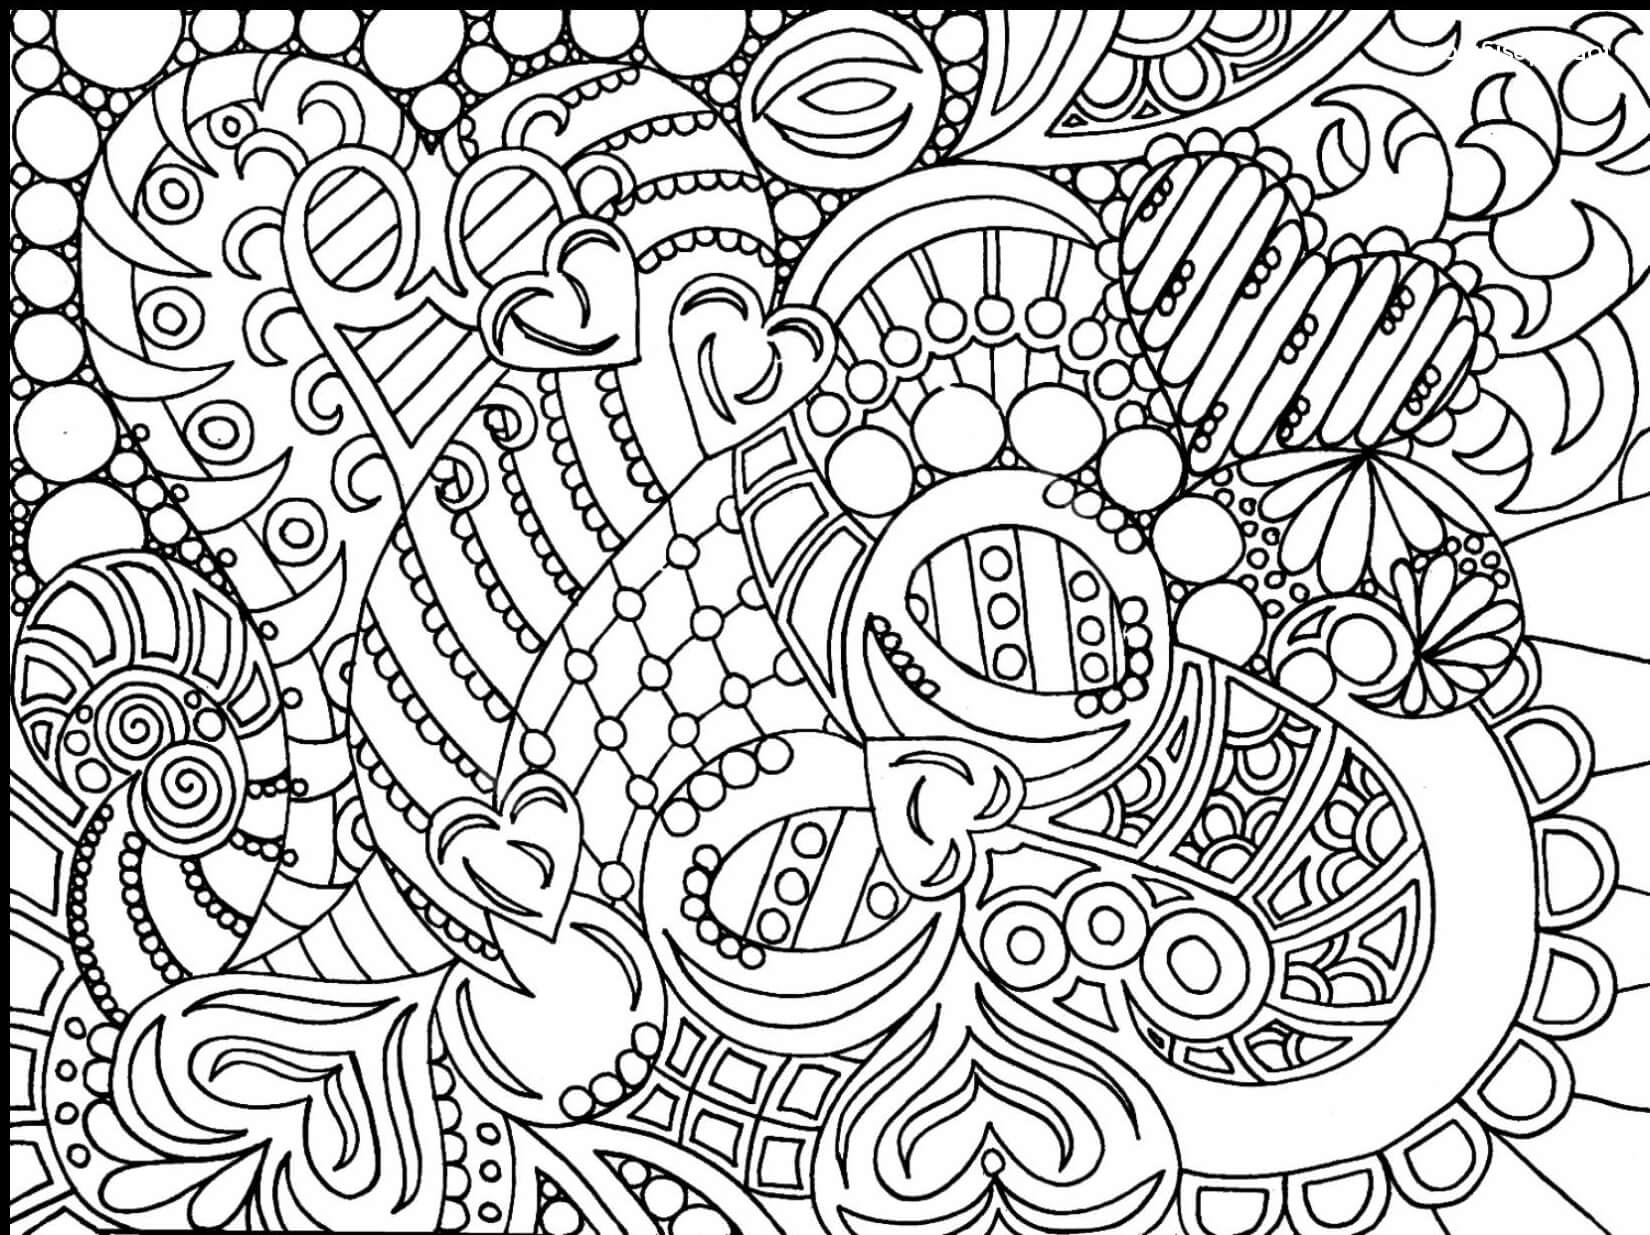 Coloring Pages For Teens Coloring rocks 